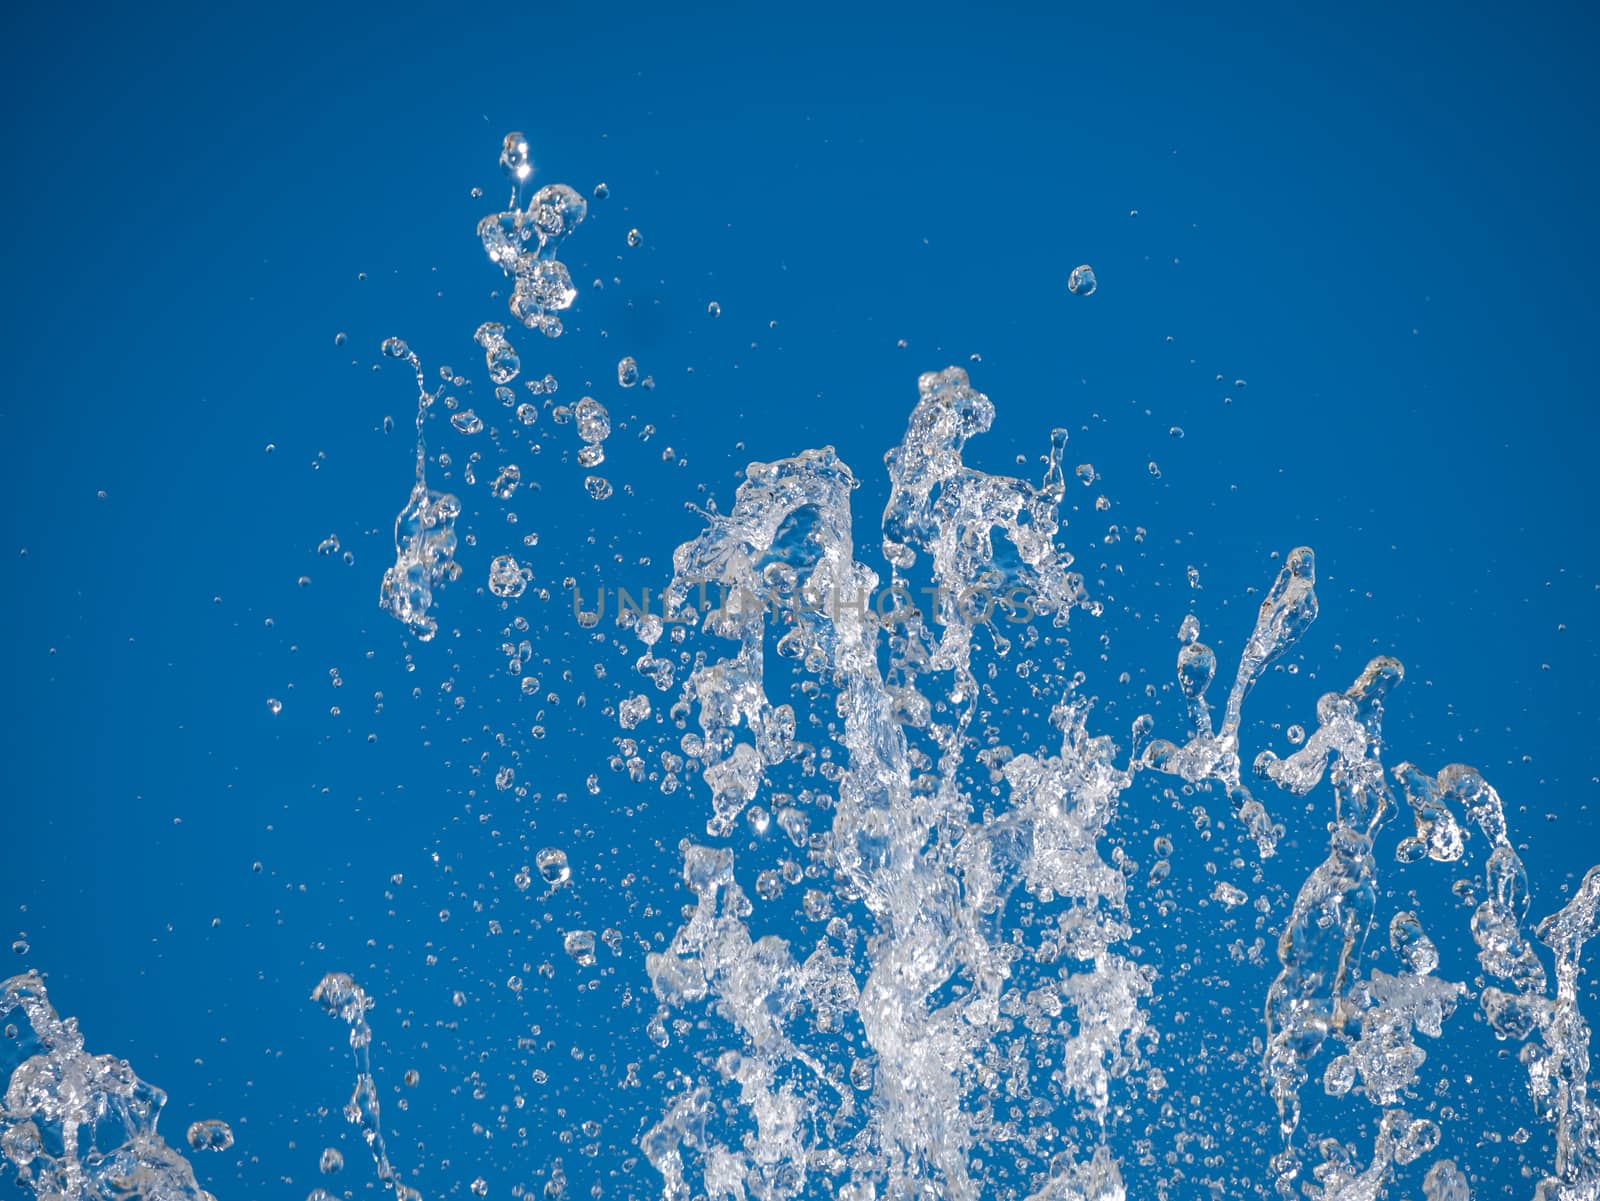 Water splash With blue background by nikky1972